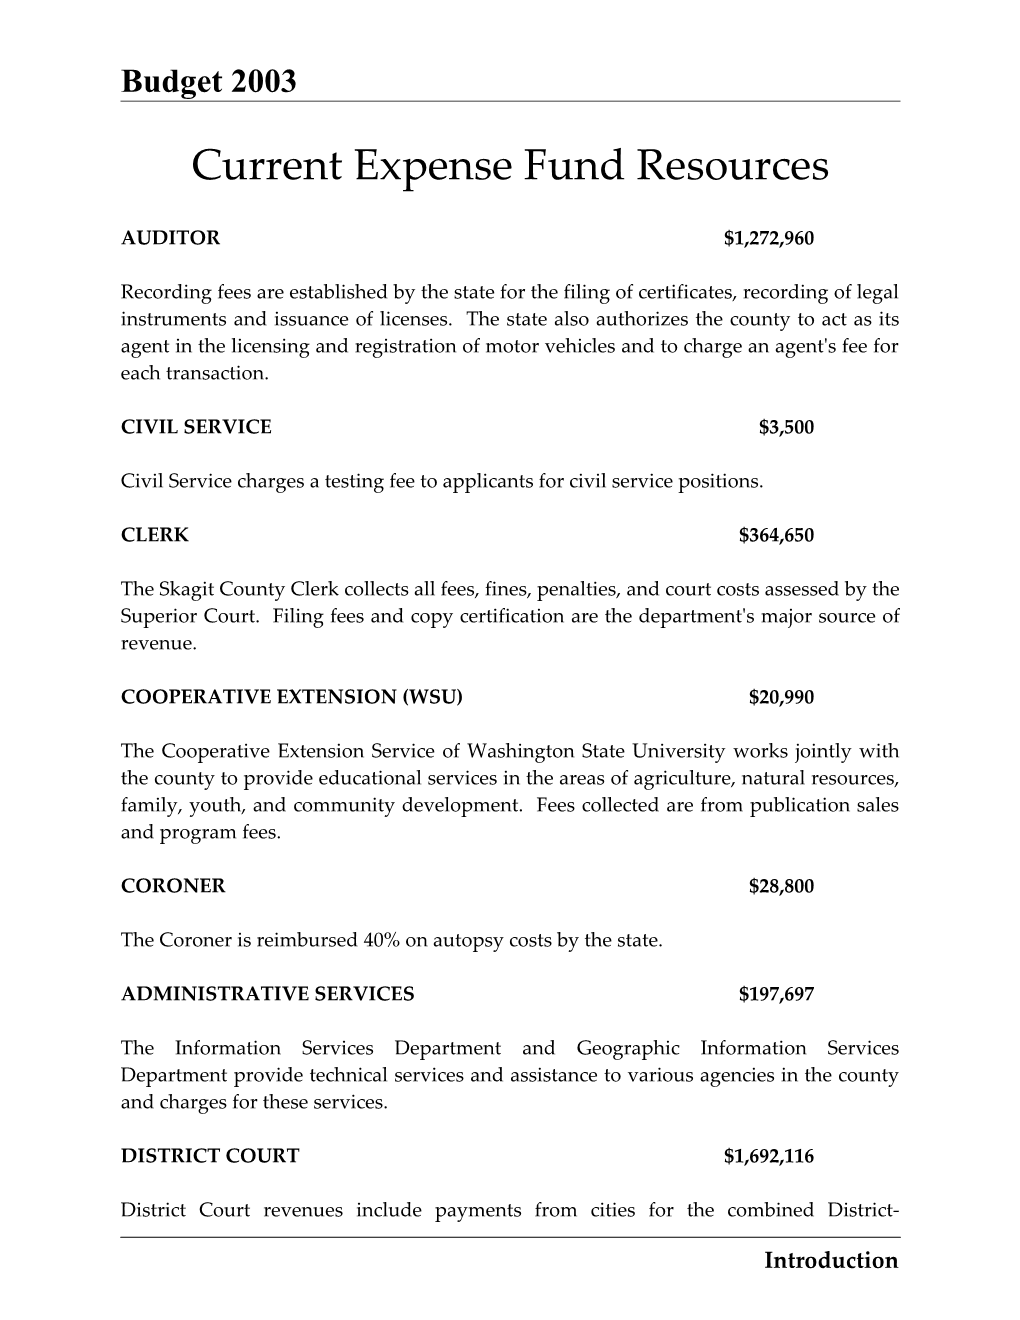 Current Expense Fund Resources